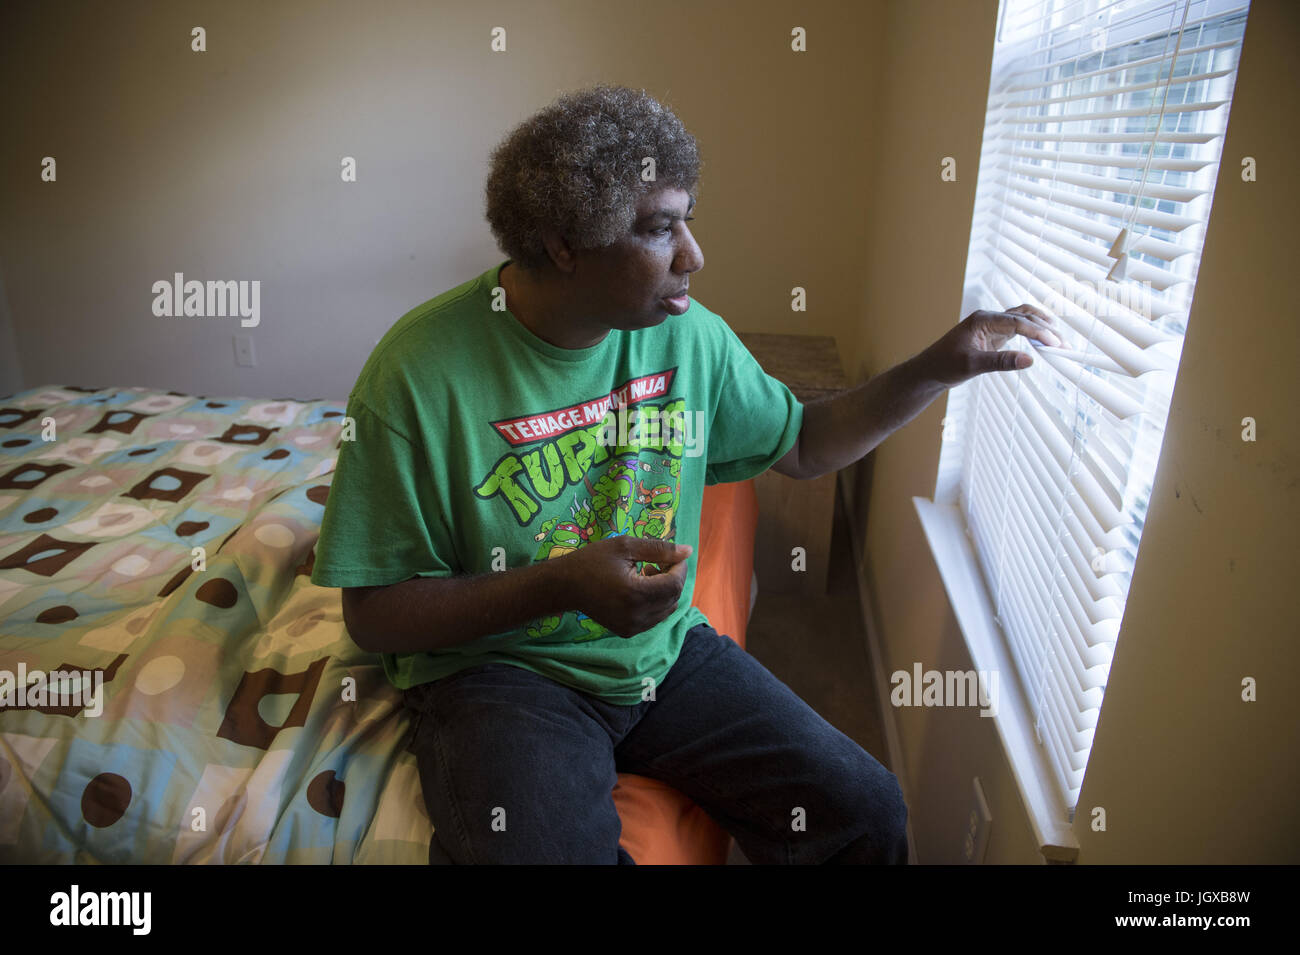 Athens, GA, USA. 13th Oct, 2014. Perry Hendricks gazes out window from his private bedroom at his duplex apartment. He is supported by staff from the Georgia Options non-profit organization that helps individuals with developmental disabilities live independently, with funding from their Medicaid waivers. Perry lived in state institutions for decades before transitioning to his own home. Credit: Robin Rayne Nelson/ZUMA Wire/Alamy Live News Stock Photo